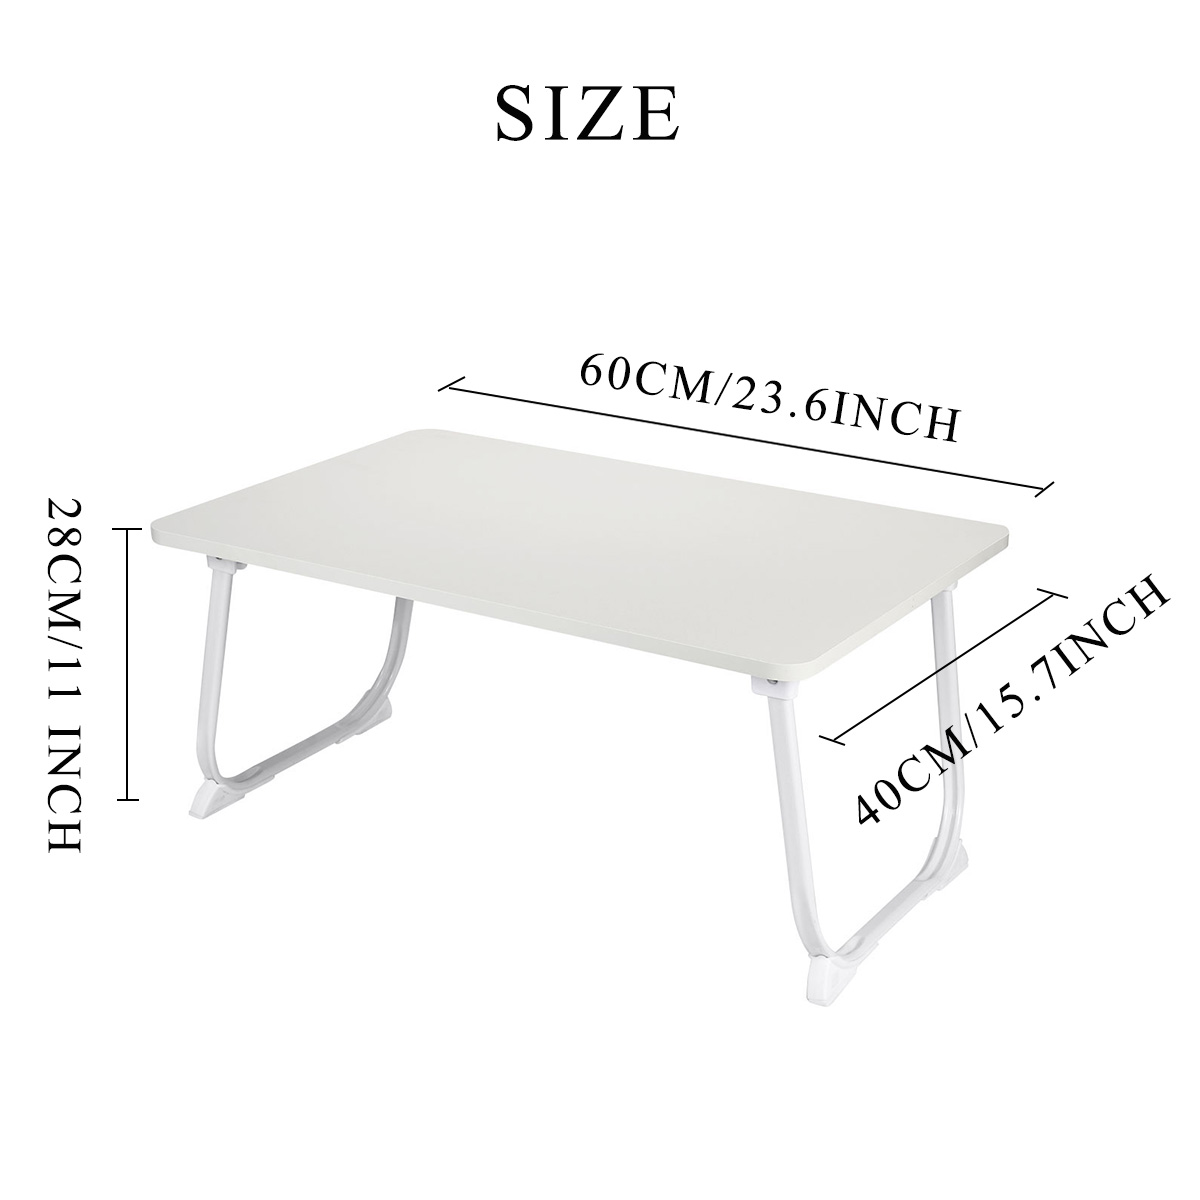 Foldable-Laptop-Desk-Portable-Notebook-Comuter-Table-Study-Table-Bed-Tray-Home-Office-Furniture-1755385-4